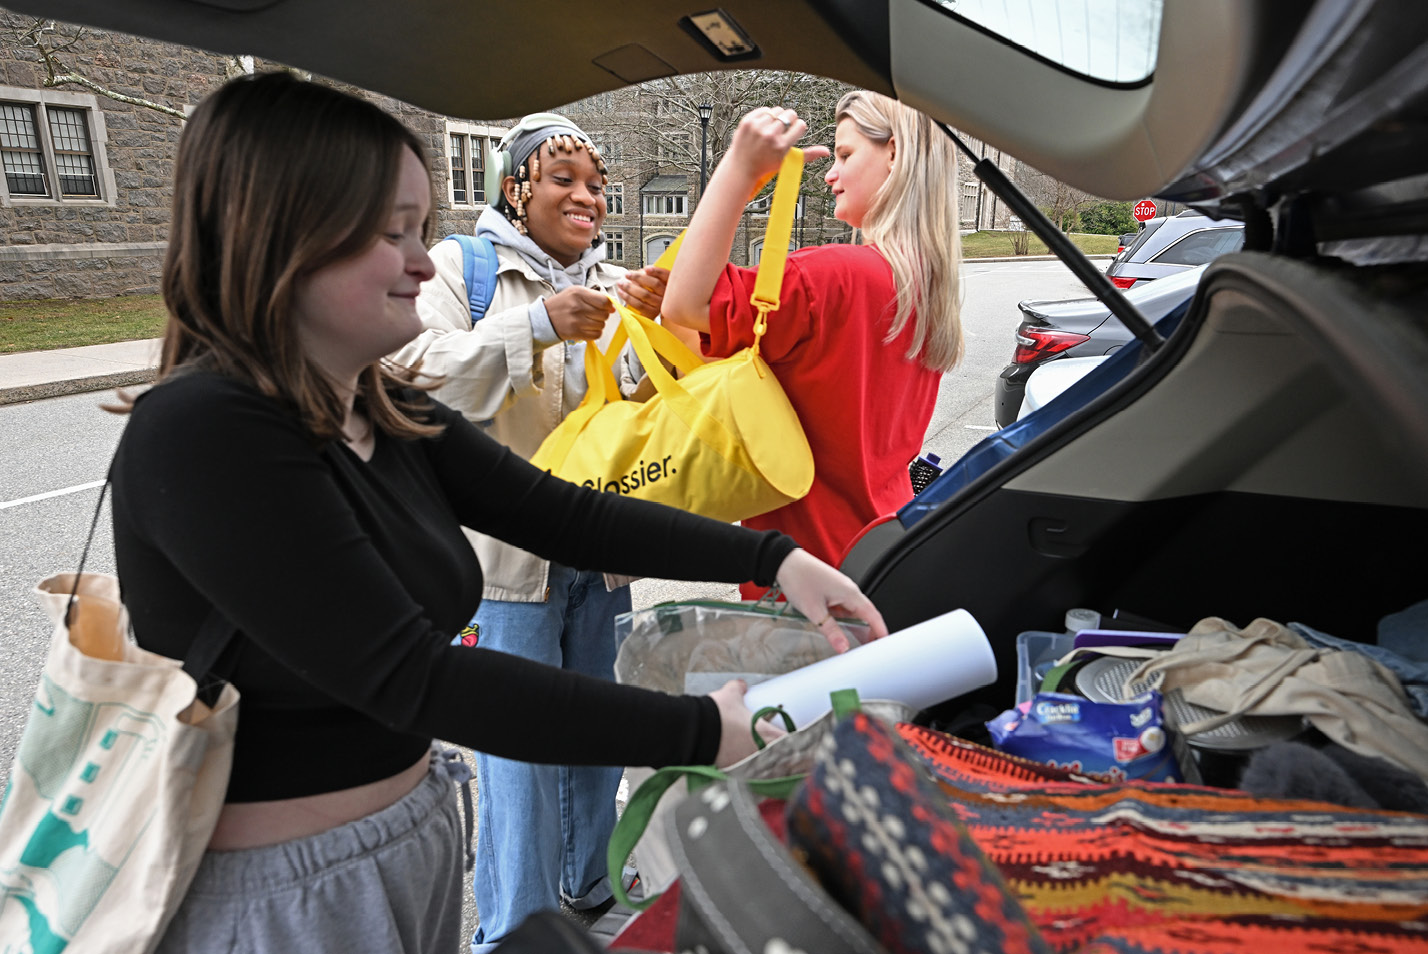 Students unloading car during January move-in.